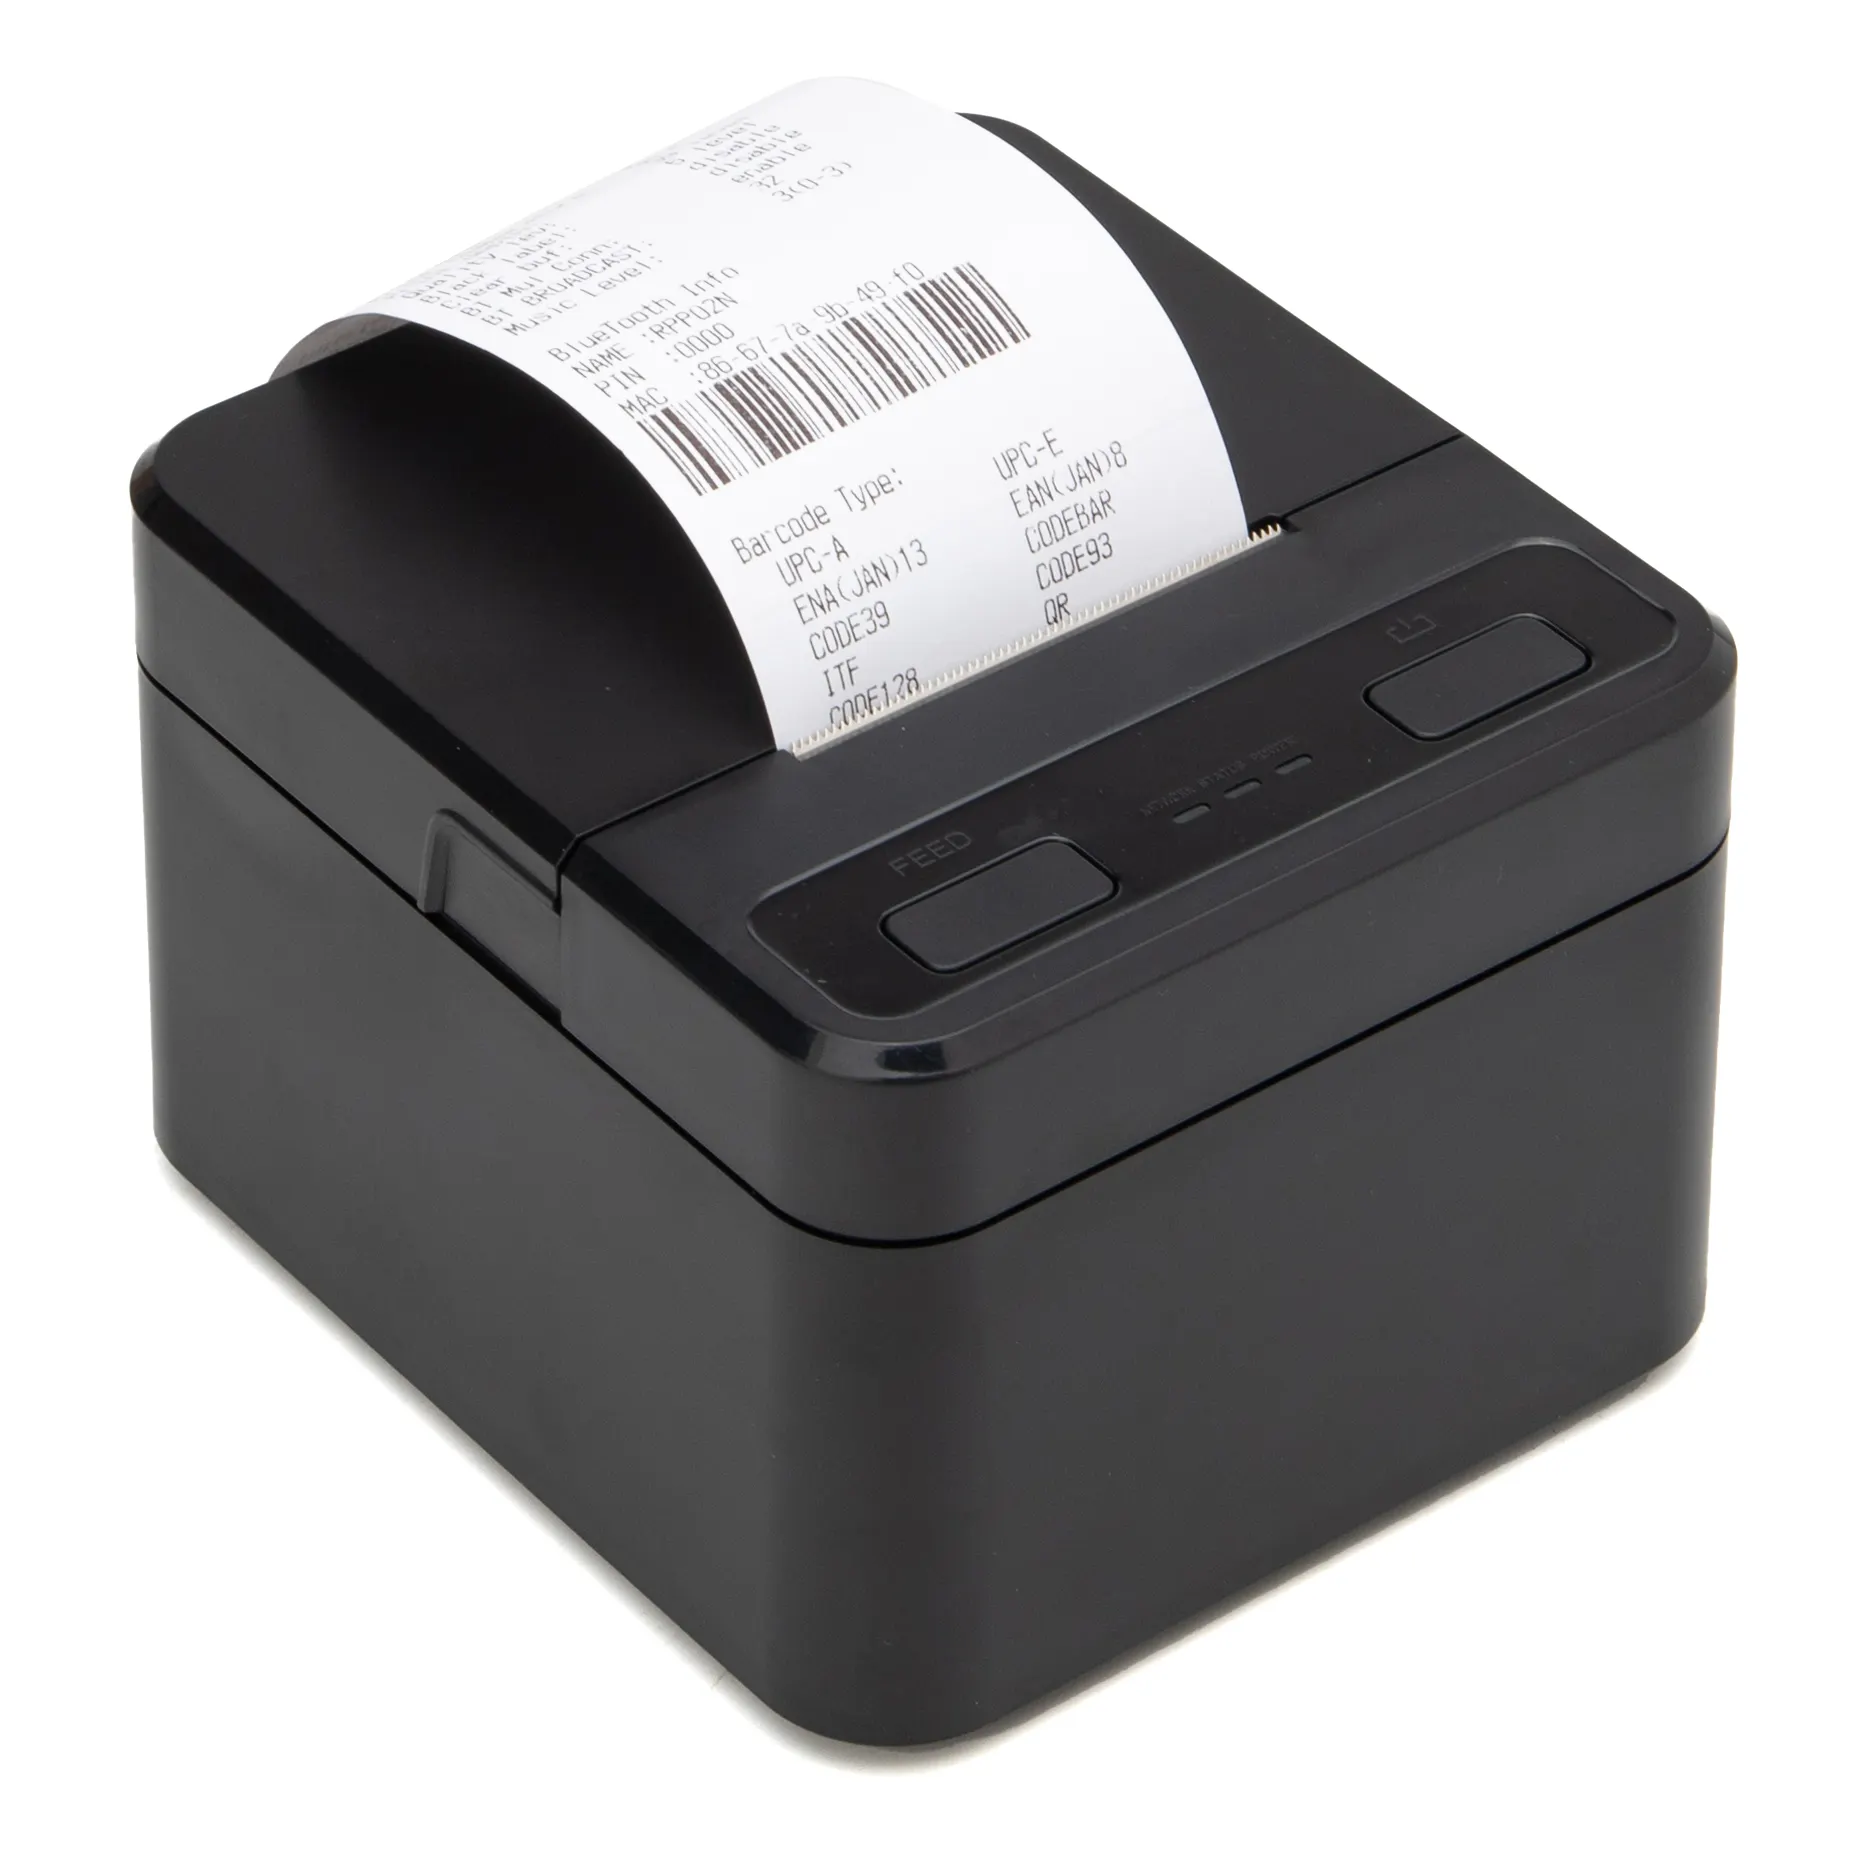 Android Thermal Printer Pos Printer Wireless Desktop With High Quality 58mm Bt Thermal Receipt Bill Printer